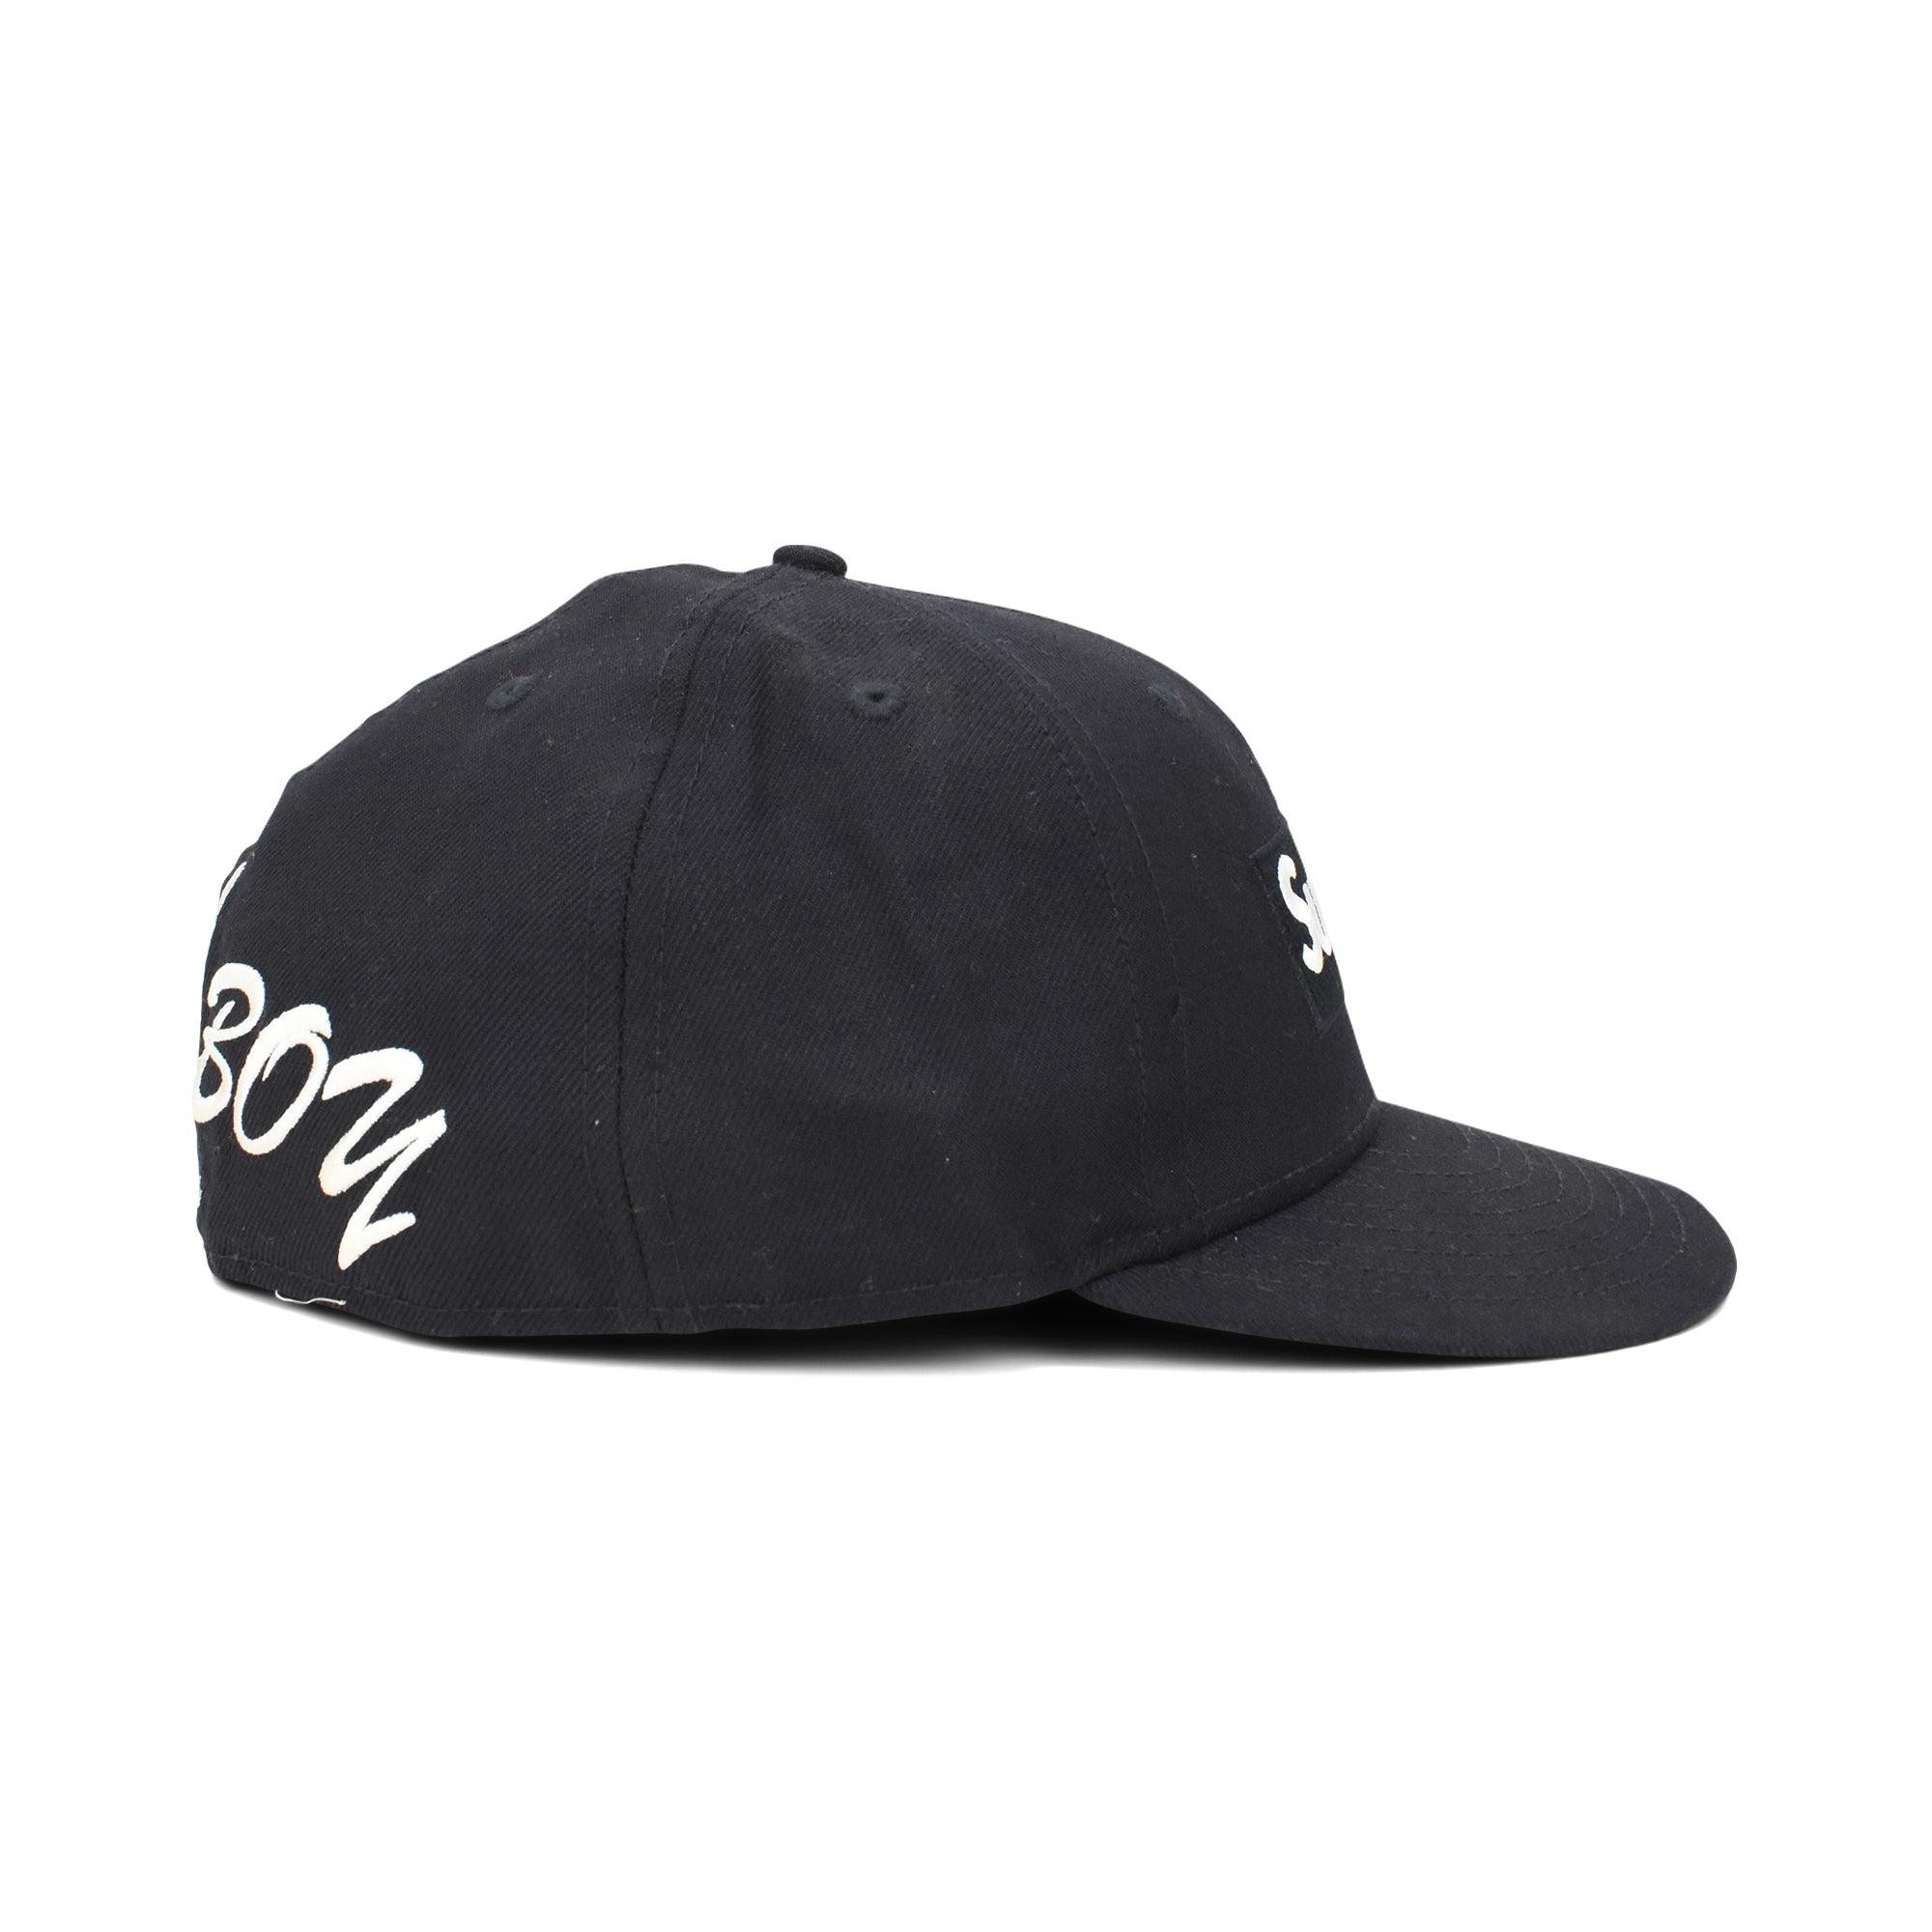 Supreme x Playboy Cap - Men's 7 5/8 - Fashionably Yours